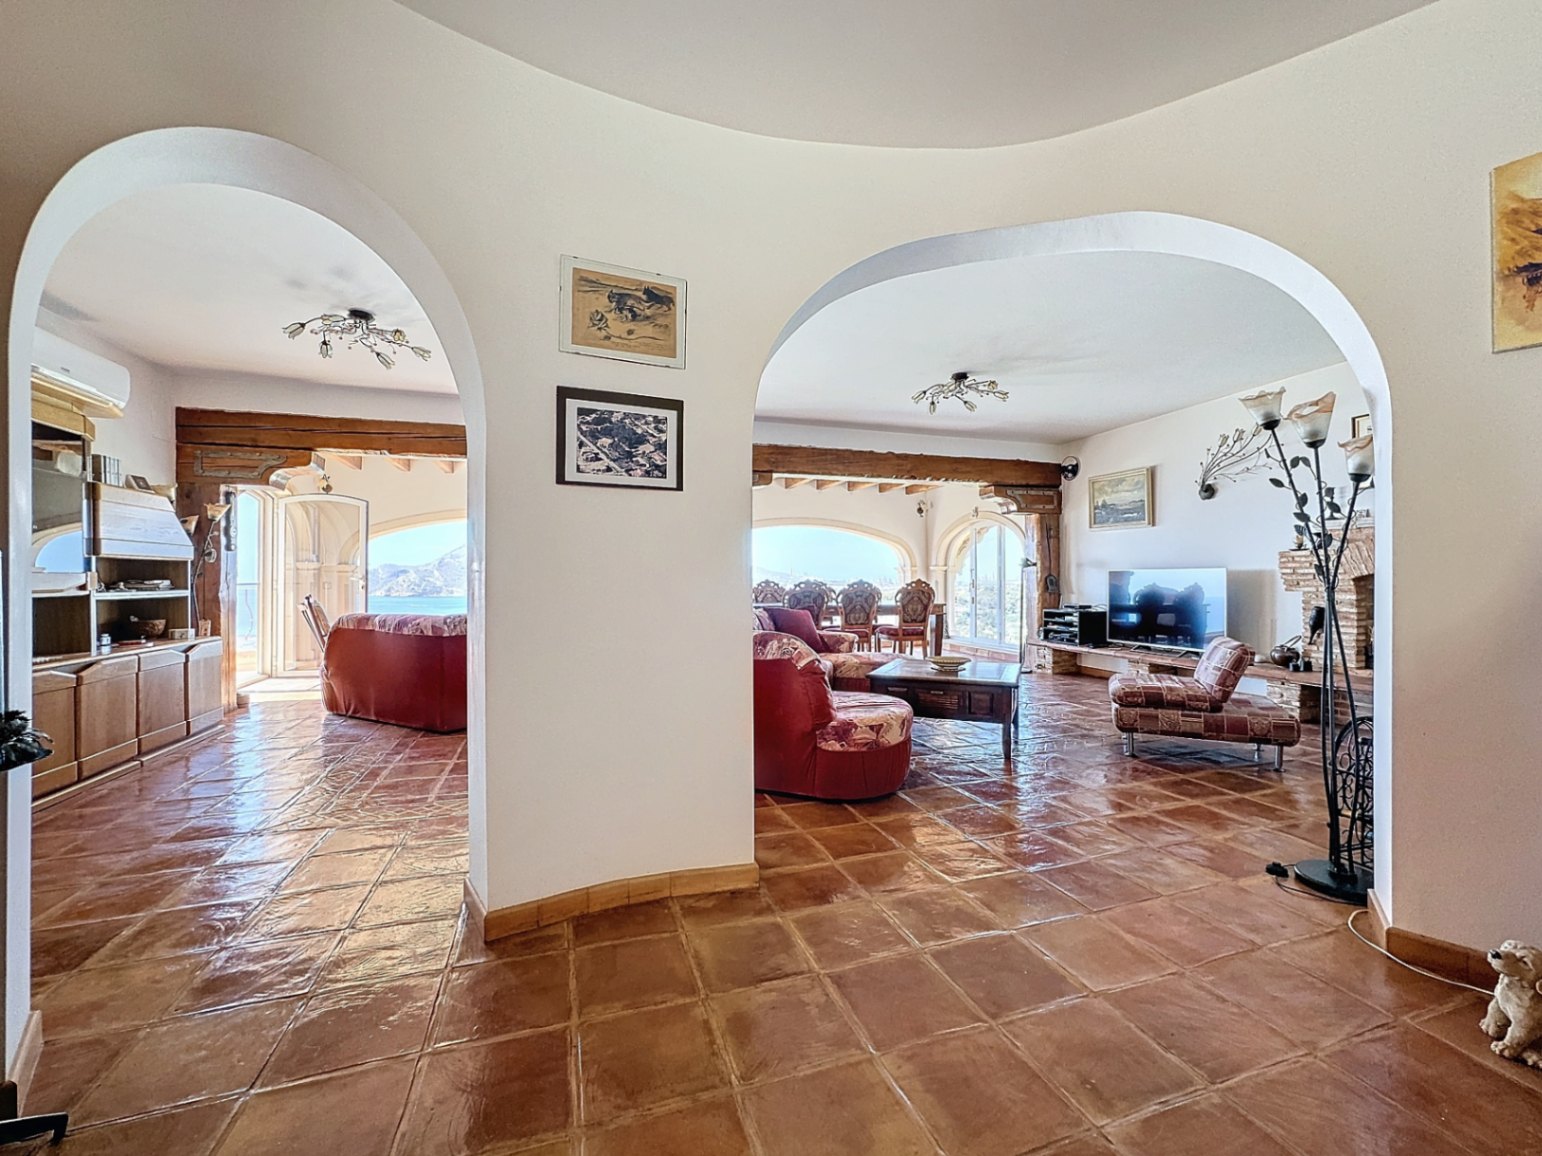 SPECTACULAR VILLA FOR SALE NEAR THE OLD TOWN OF ALTEA